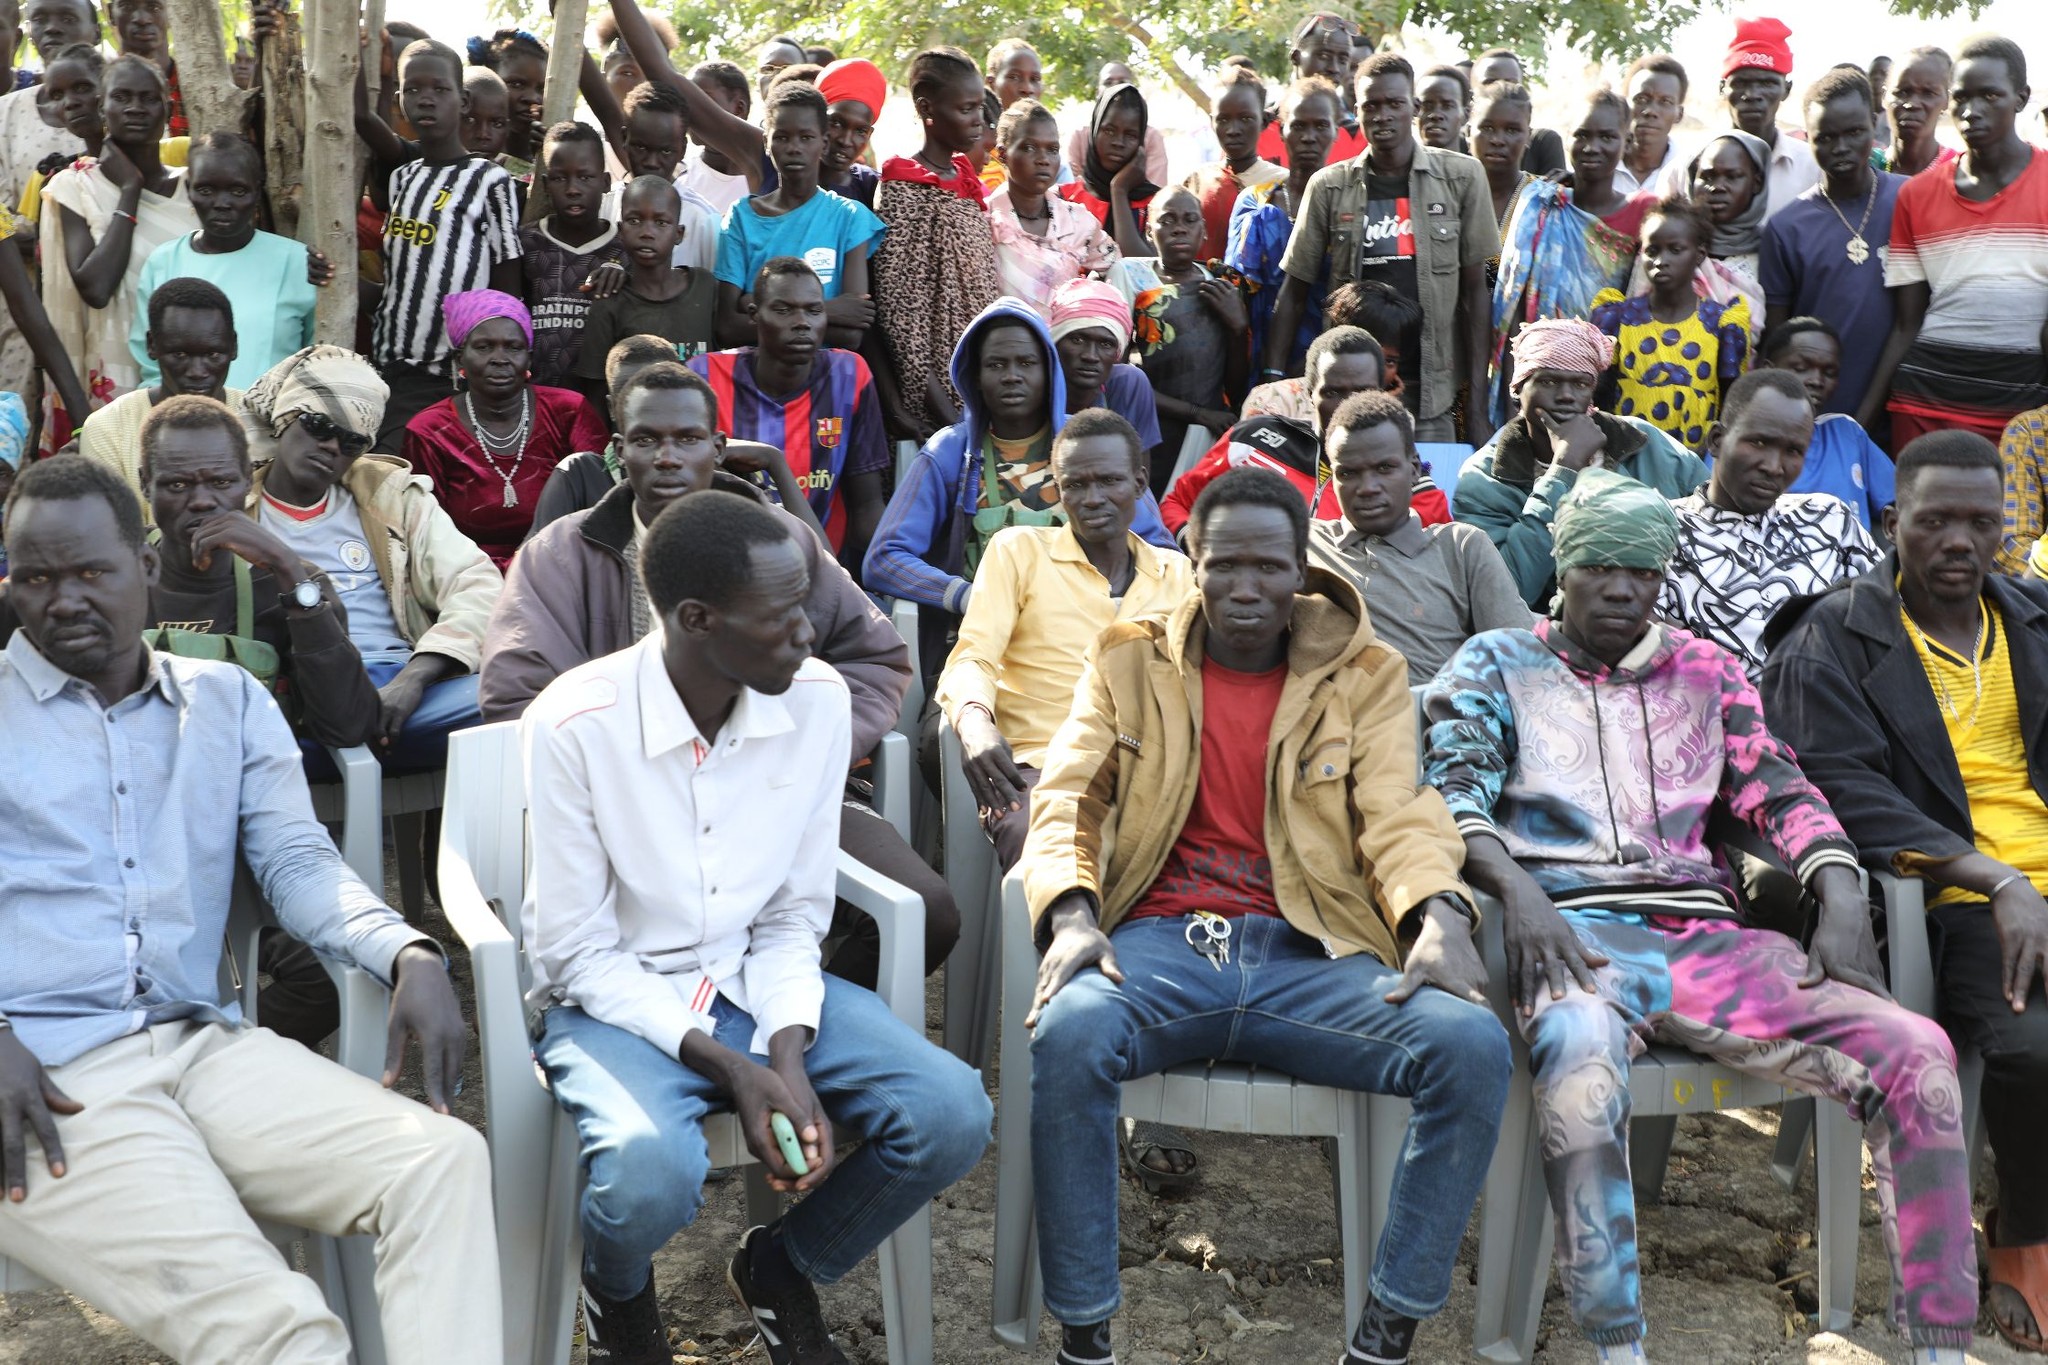 Manytuil pardons 400 Mayom youth for obeying Kiir’s order